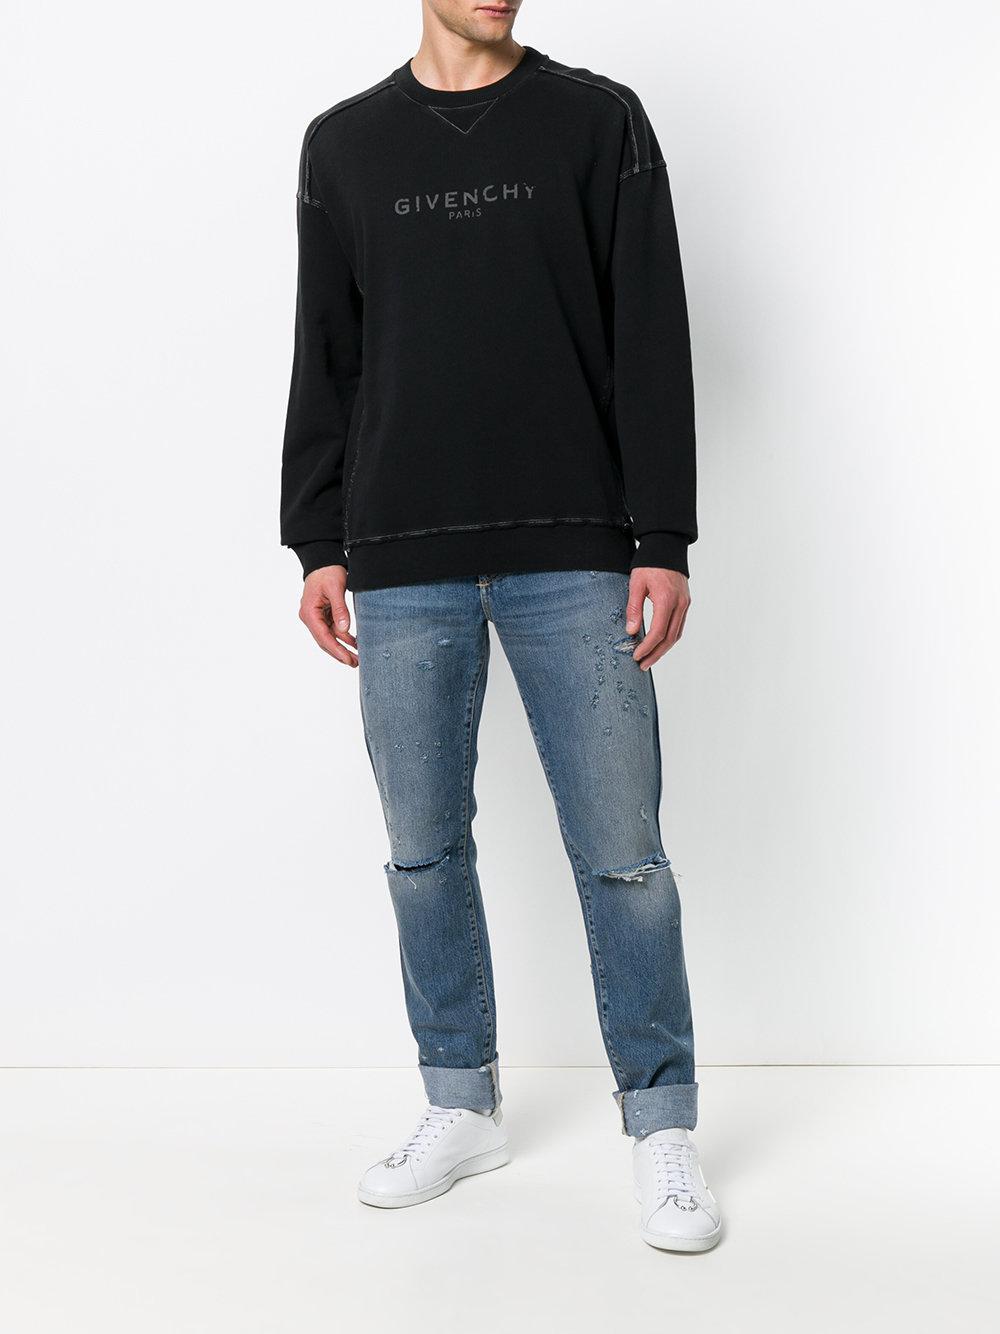 givenchy blurred logo hoodie